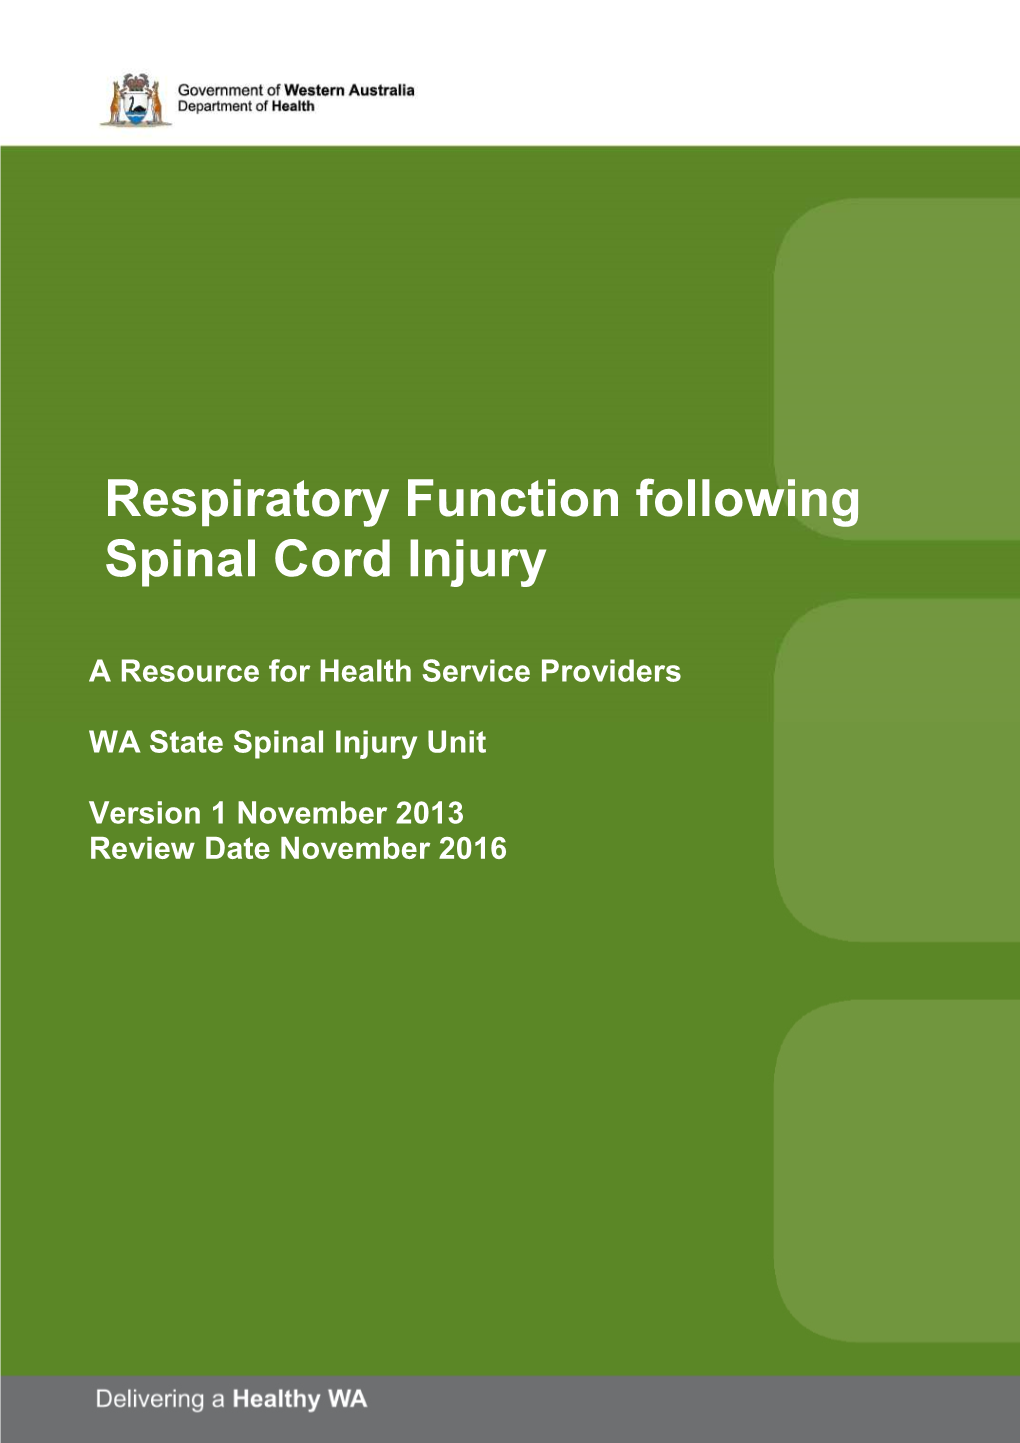 Respiratory Function Following Spinal Cord Injury